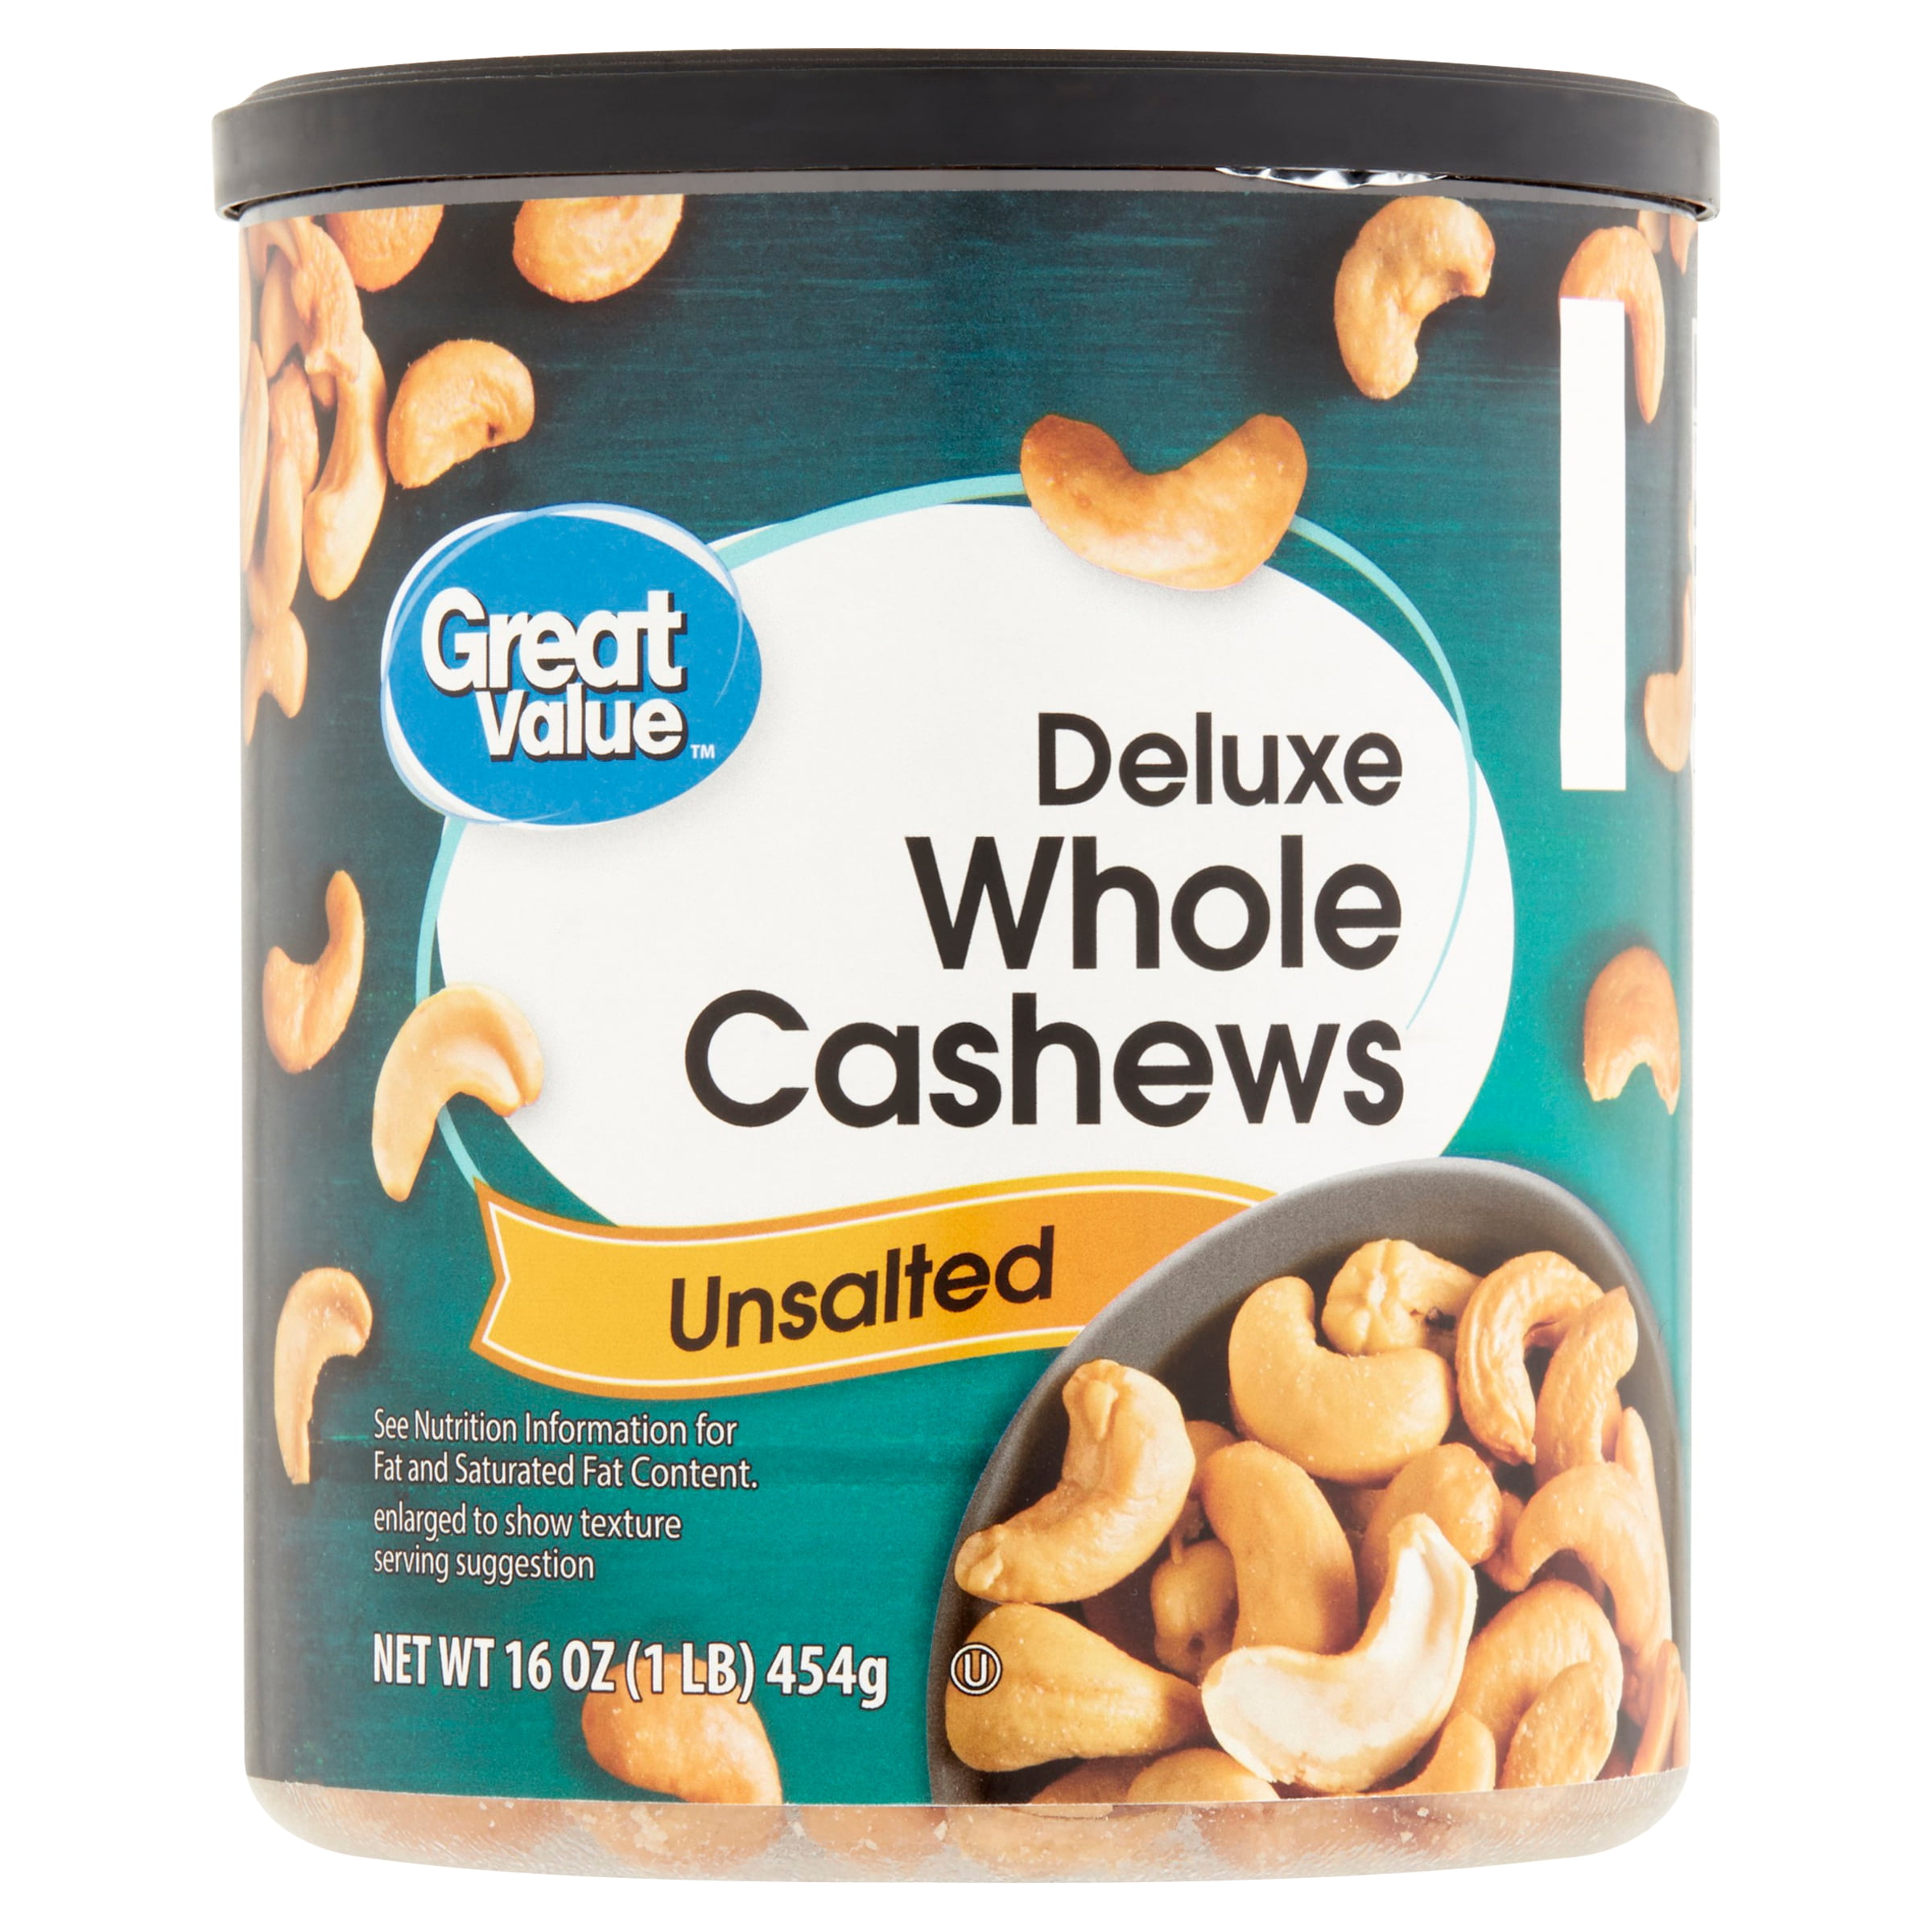 Great Value Deluxe Whole Cashews, Unsalted, 16 oz